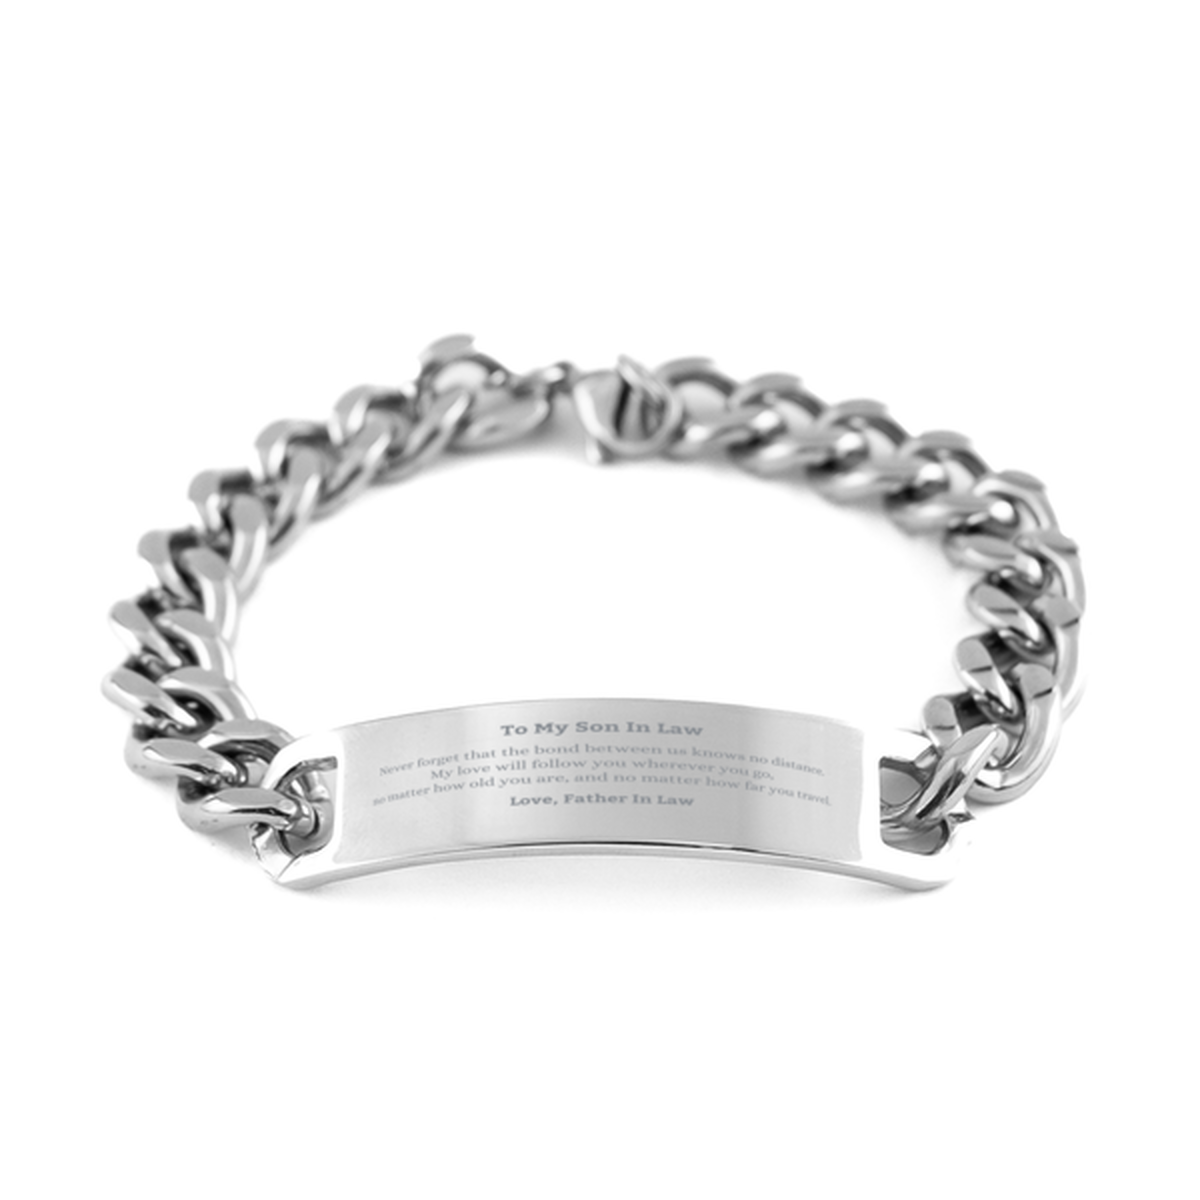 Son In Law Birthday Gifts from Father In Law, Adjustable Cuban Chain Stainless Steel Bracelet for Son In Law Christmas Graduation Unique Gifts Son In Law Never forget that the bond between us knows no distance. Love, Father In Law